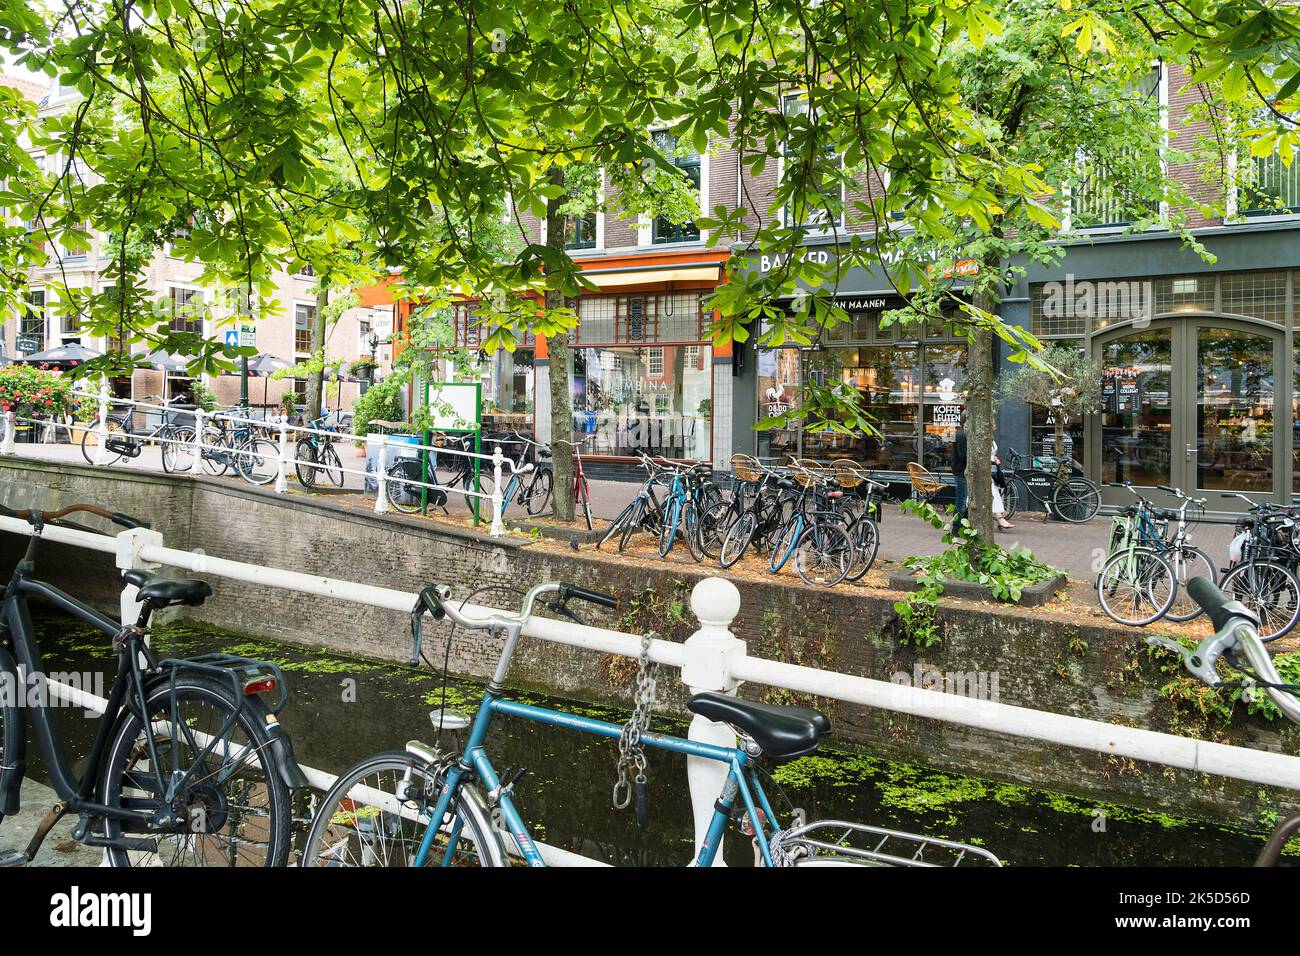 Delft (Netherlands), historic old town, voorstraat, canal, bicycles Stock Photo